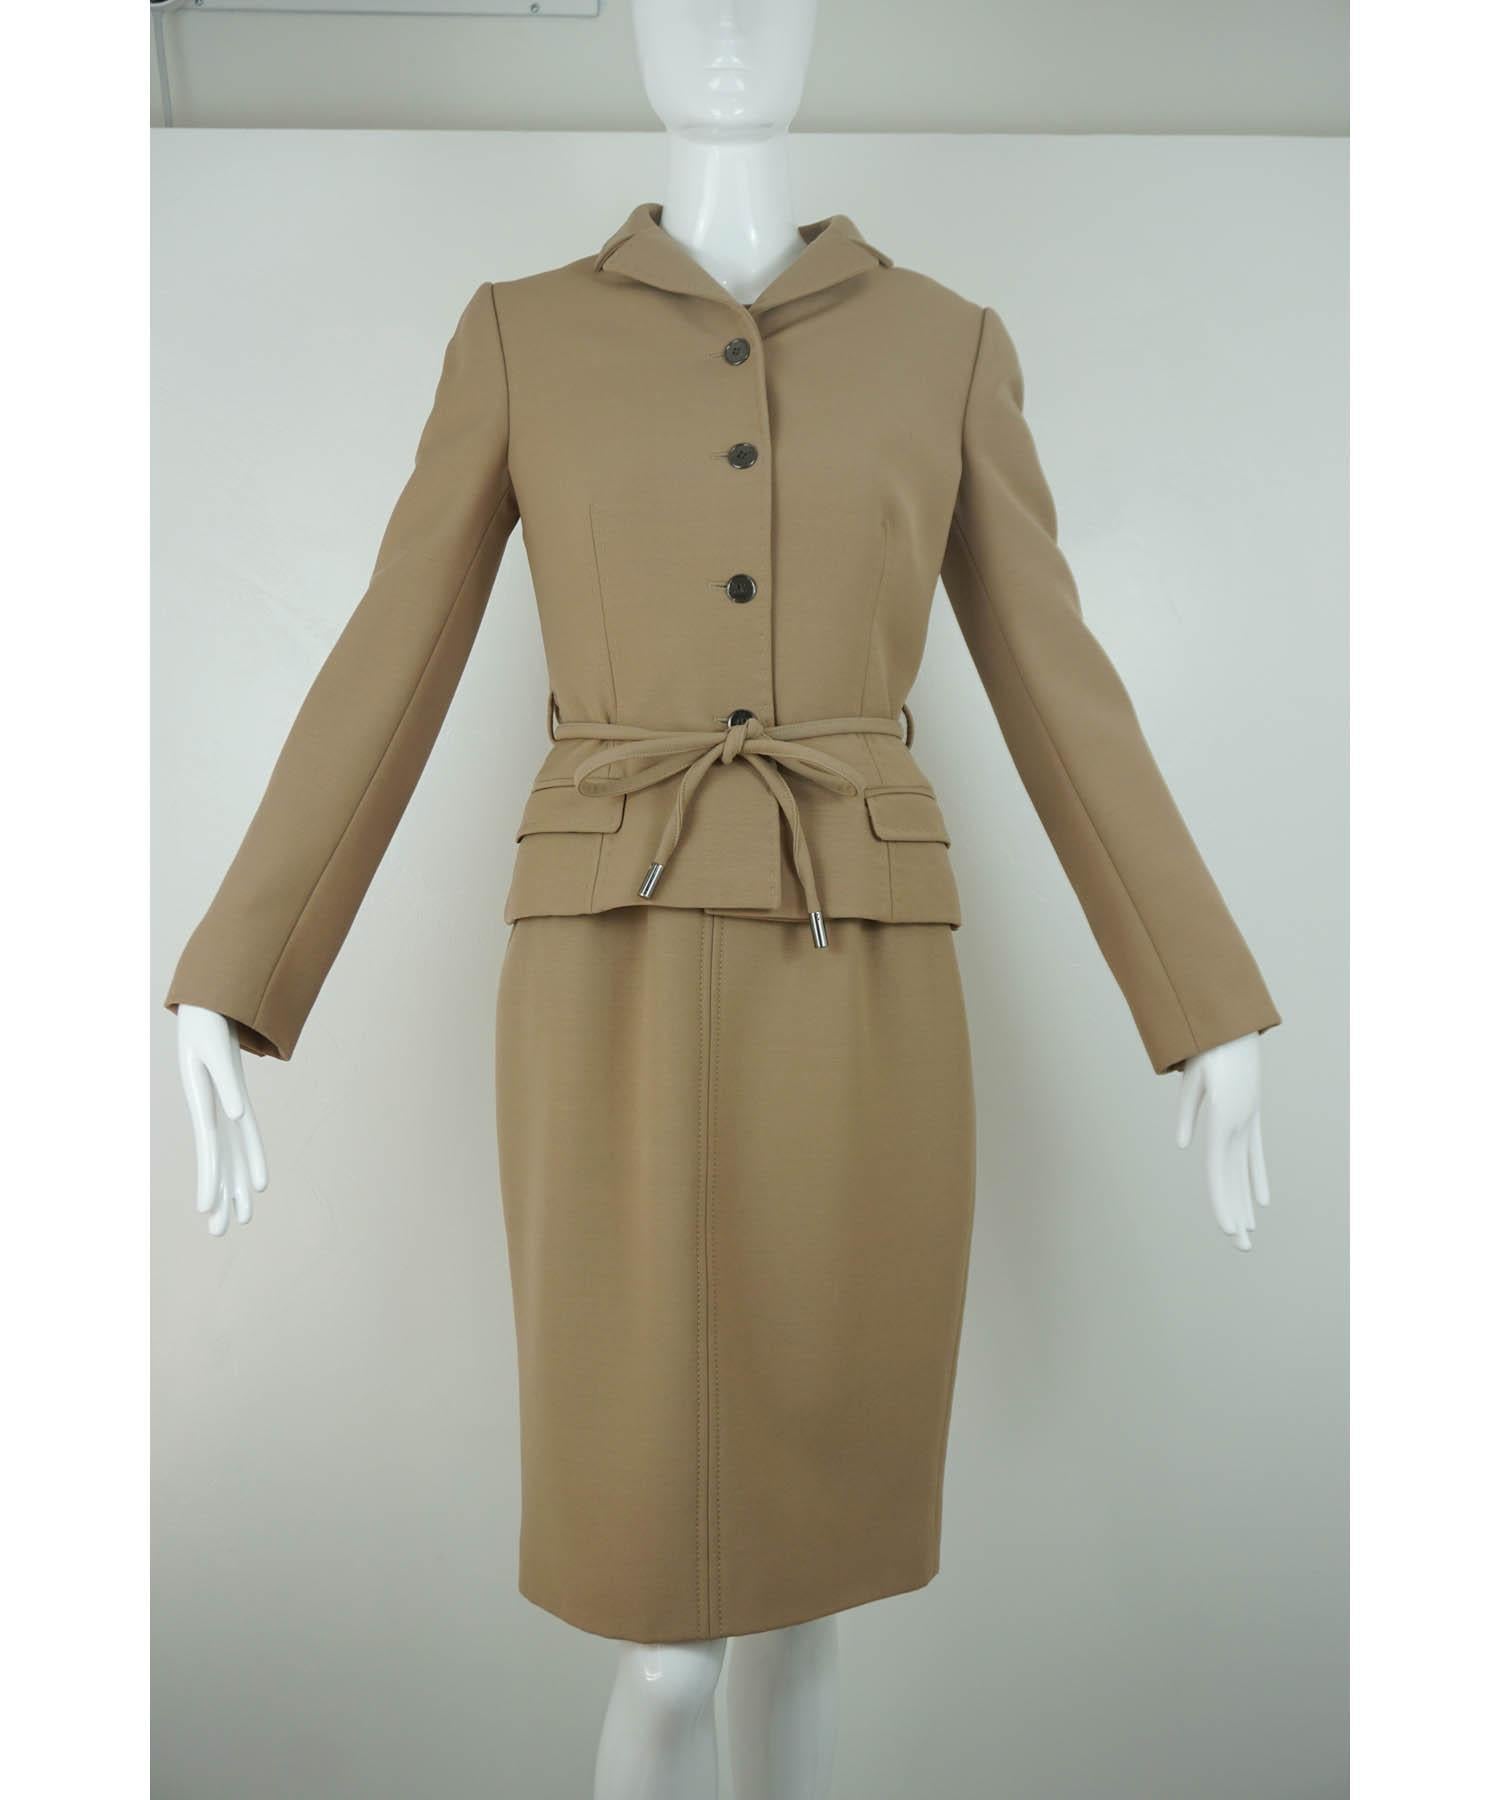 Dolce & Gabbana Dress and Belted Jacket Sz 42/6 In Excellent Condition For Sale In Carmel, CA